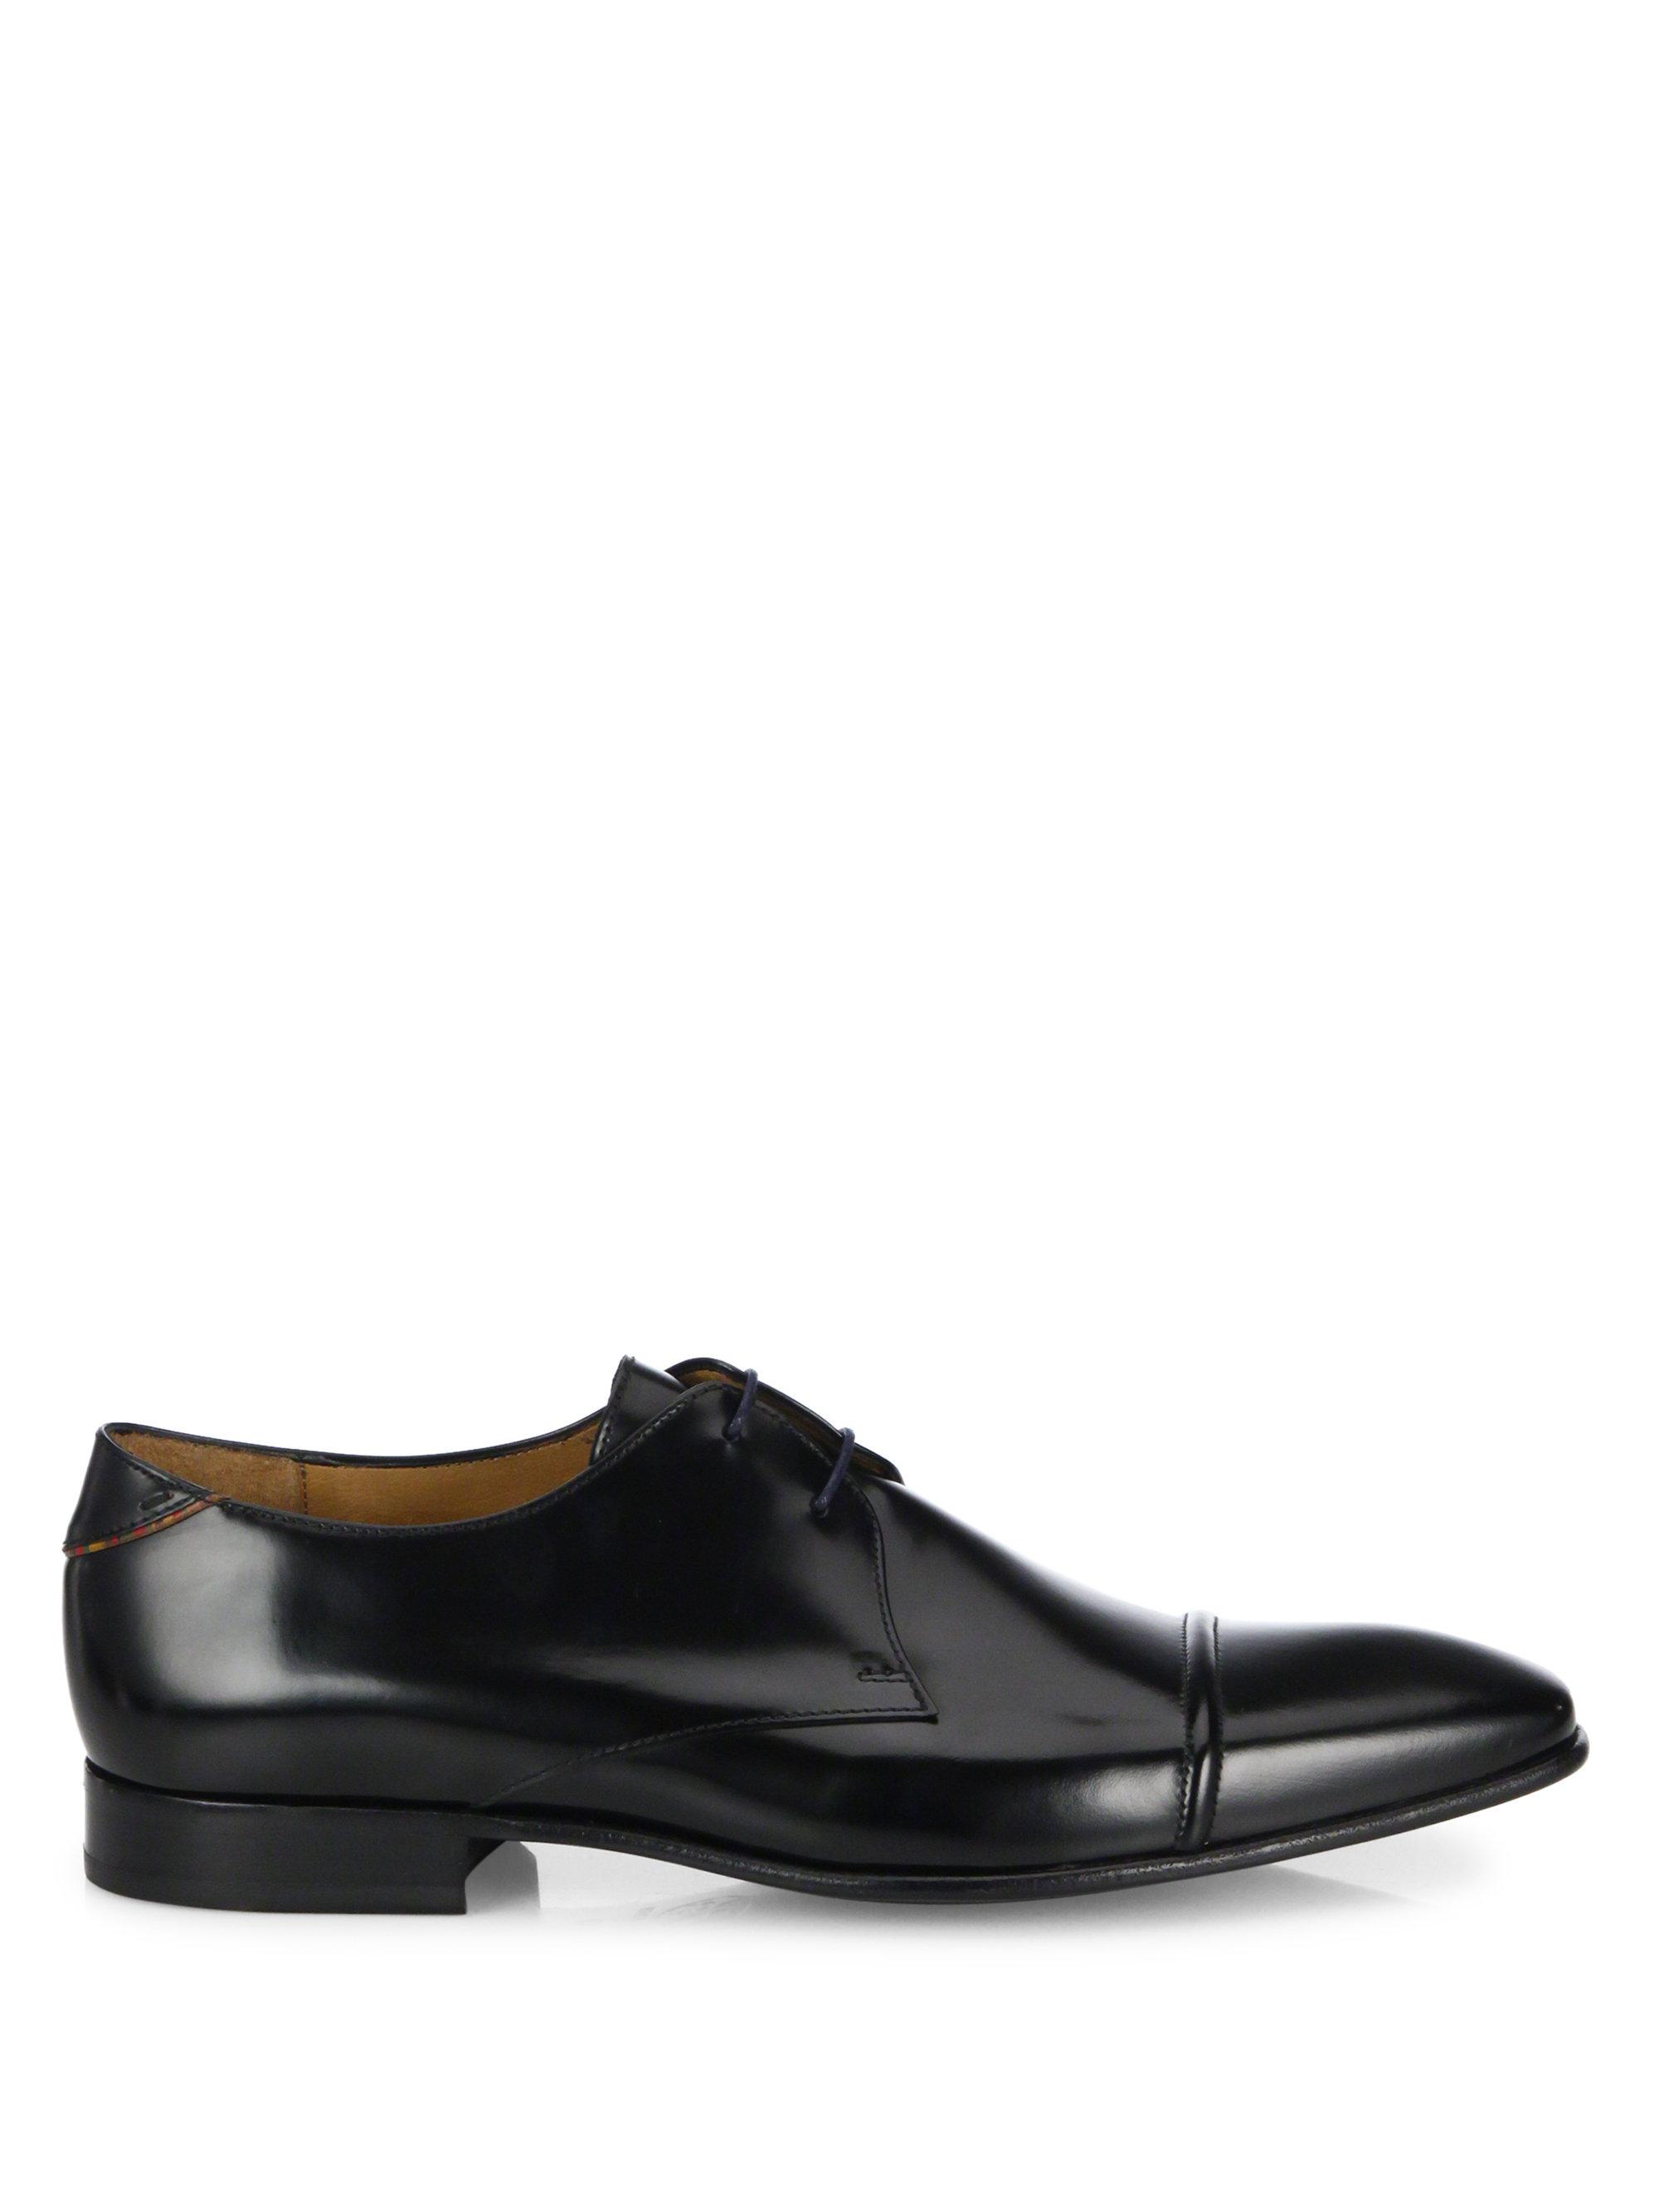 Lyst - Paul Smith Robin Leather Derby Shoes in Black for Men